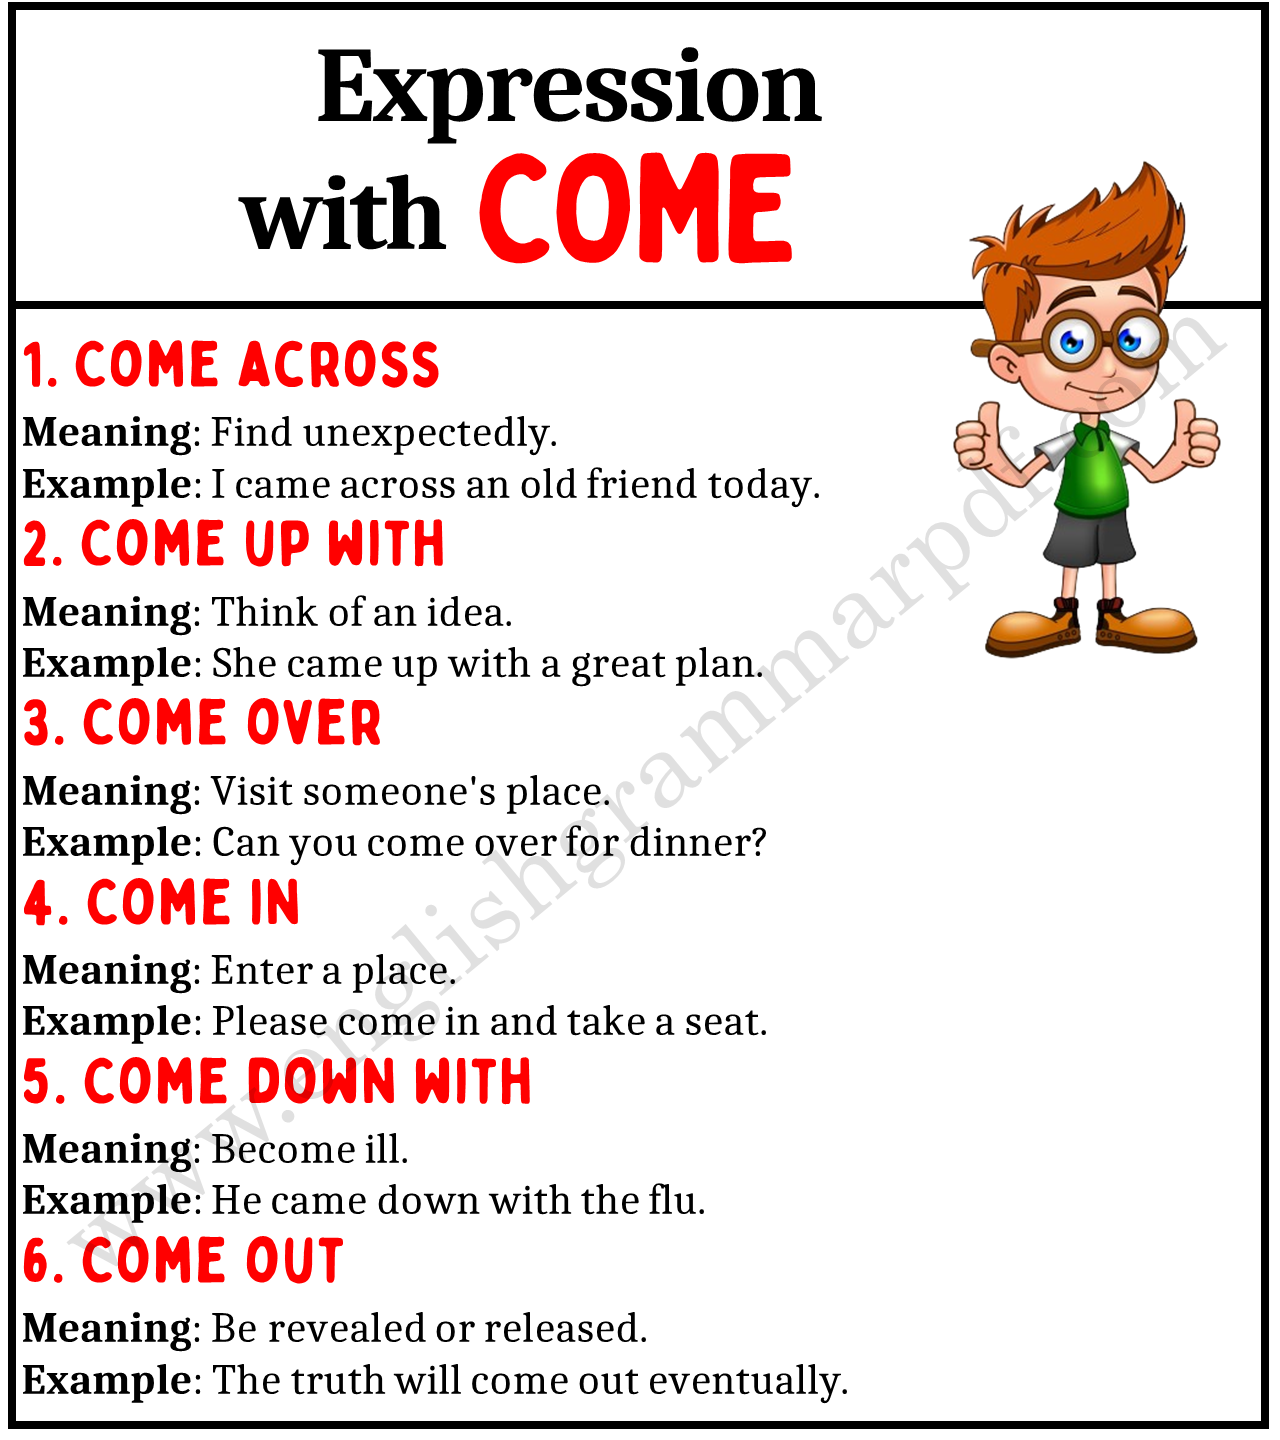 Expressions with COME